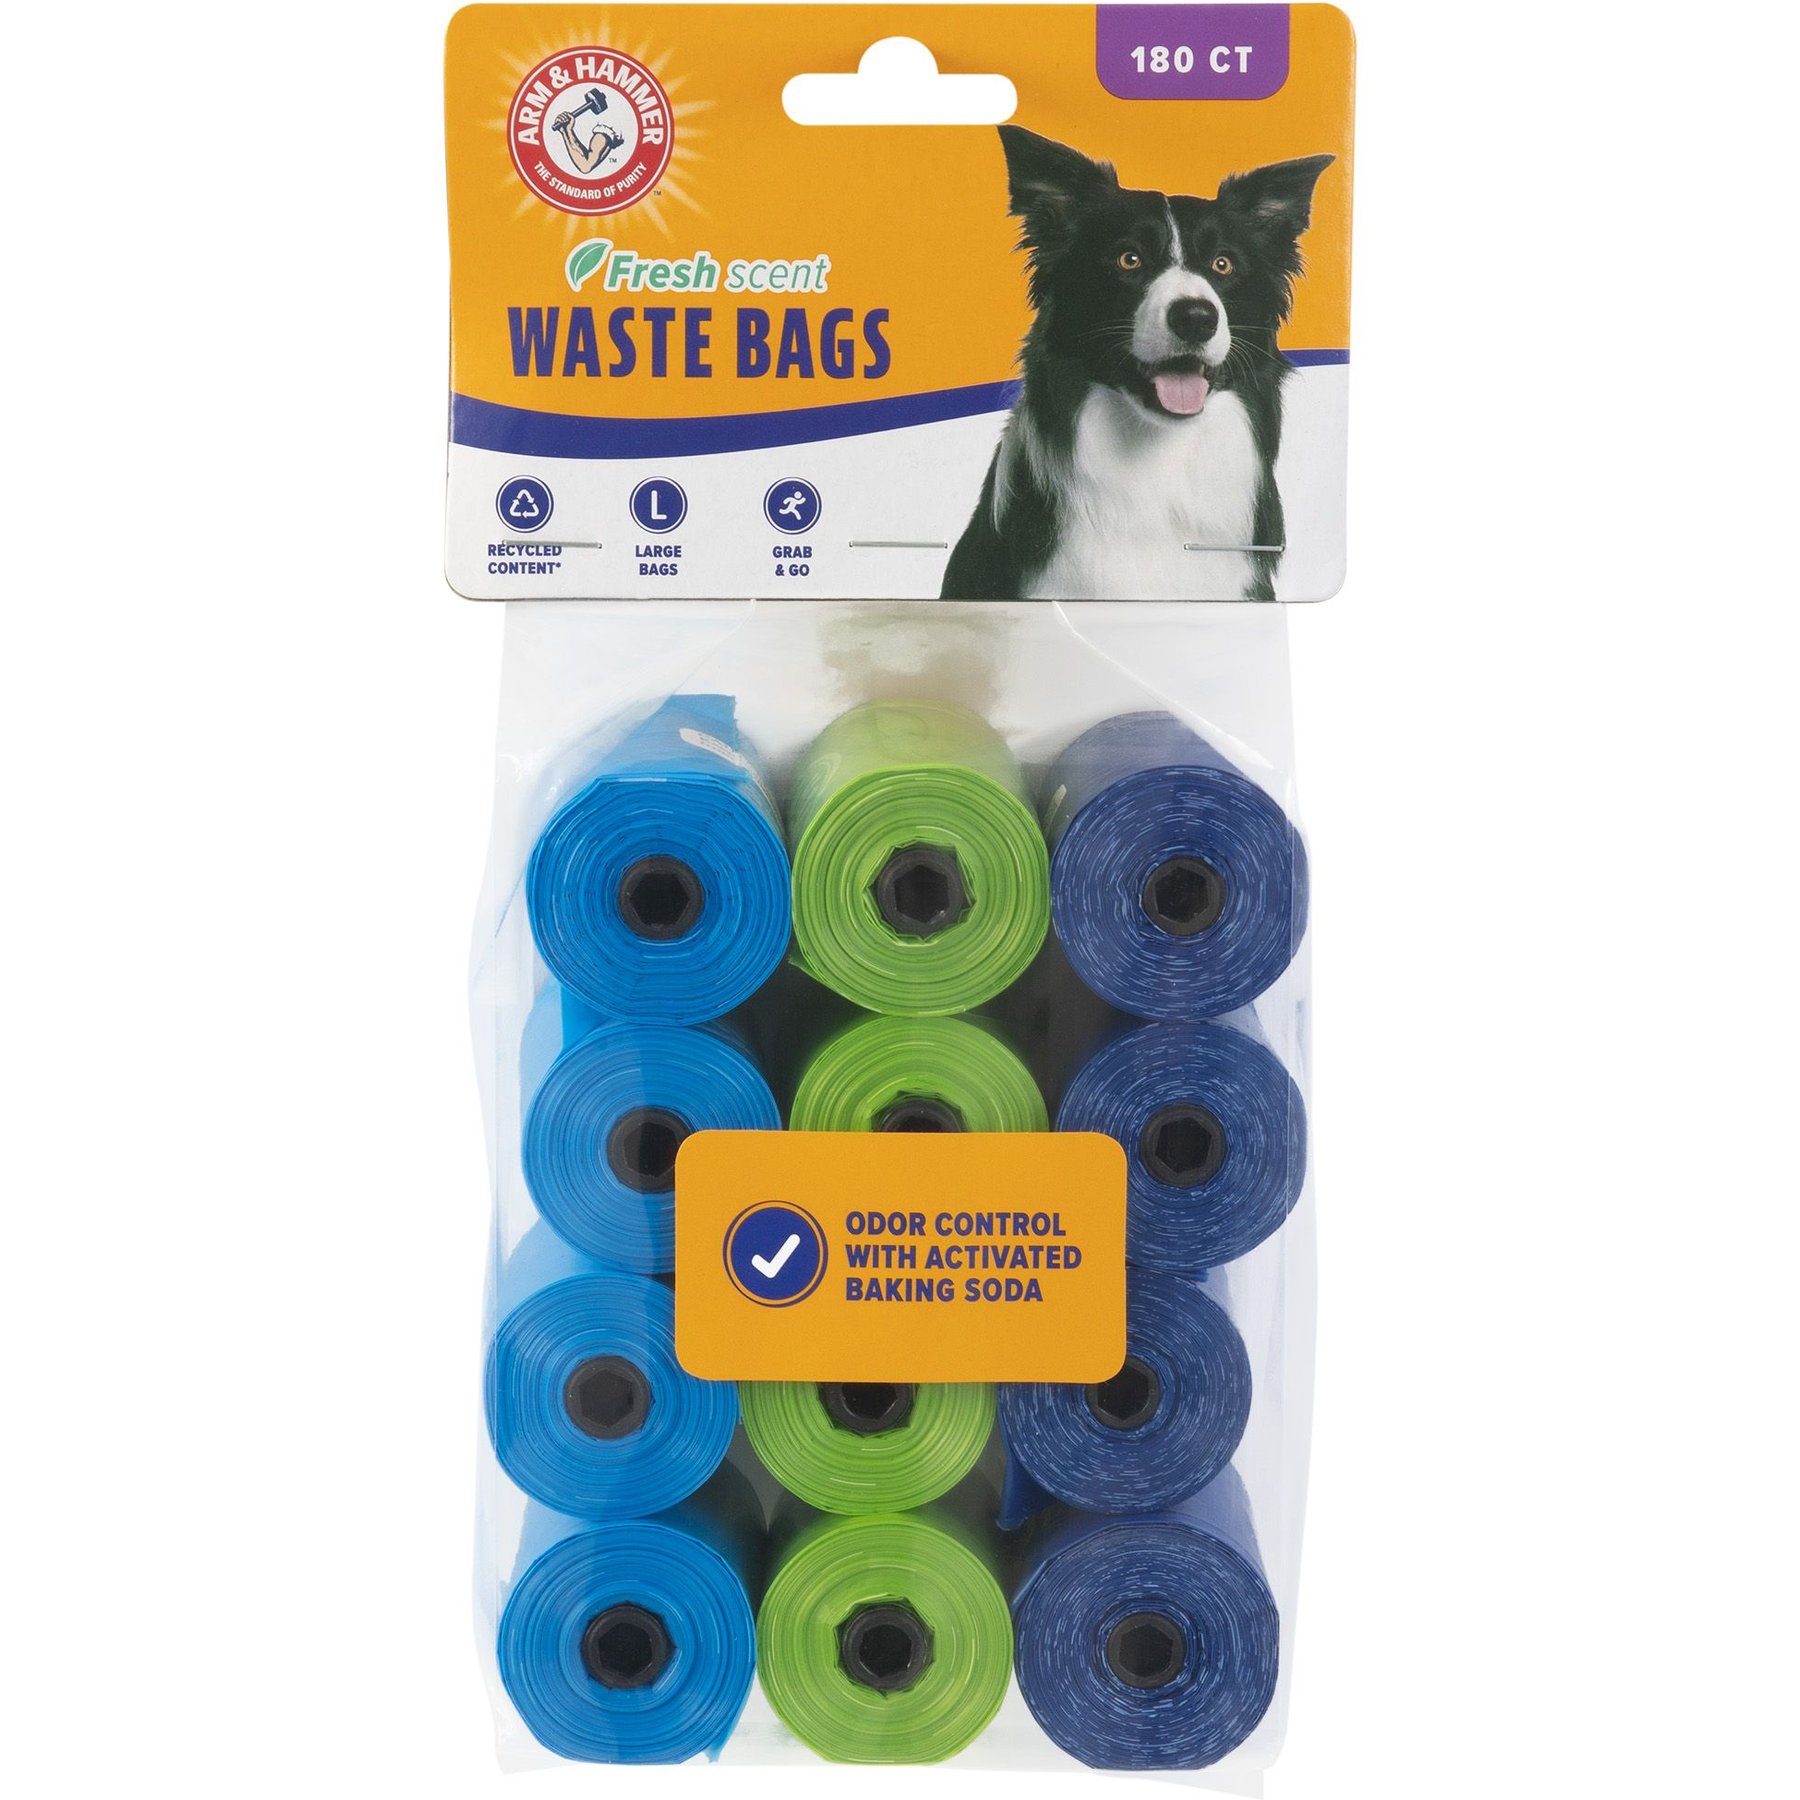  Earth Rated Dog Poop Bags - Leak-Proof and Extra-Thick Pet  Waste Bags for Big and Small Dogs - Refill Rolls - Lavender Scented - 270  Count : Pet Waste Bags : Pet Supplies